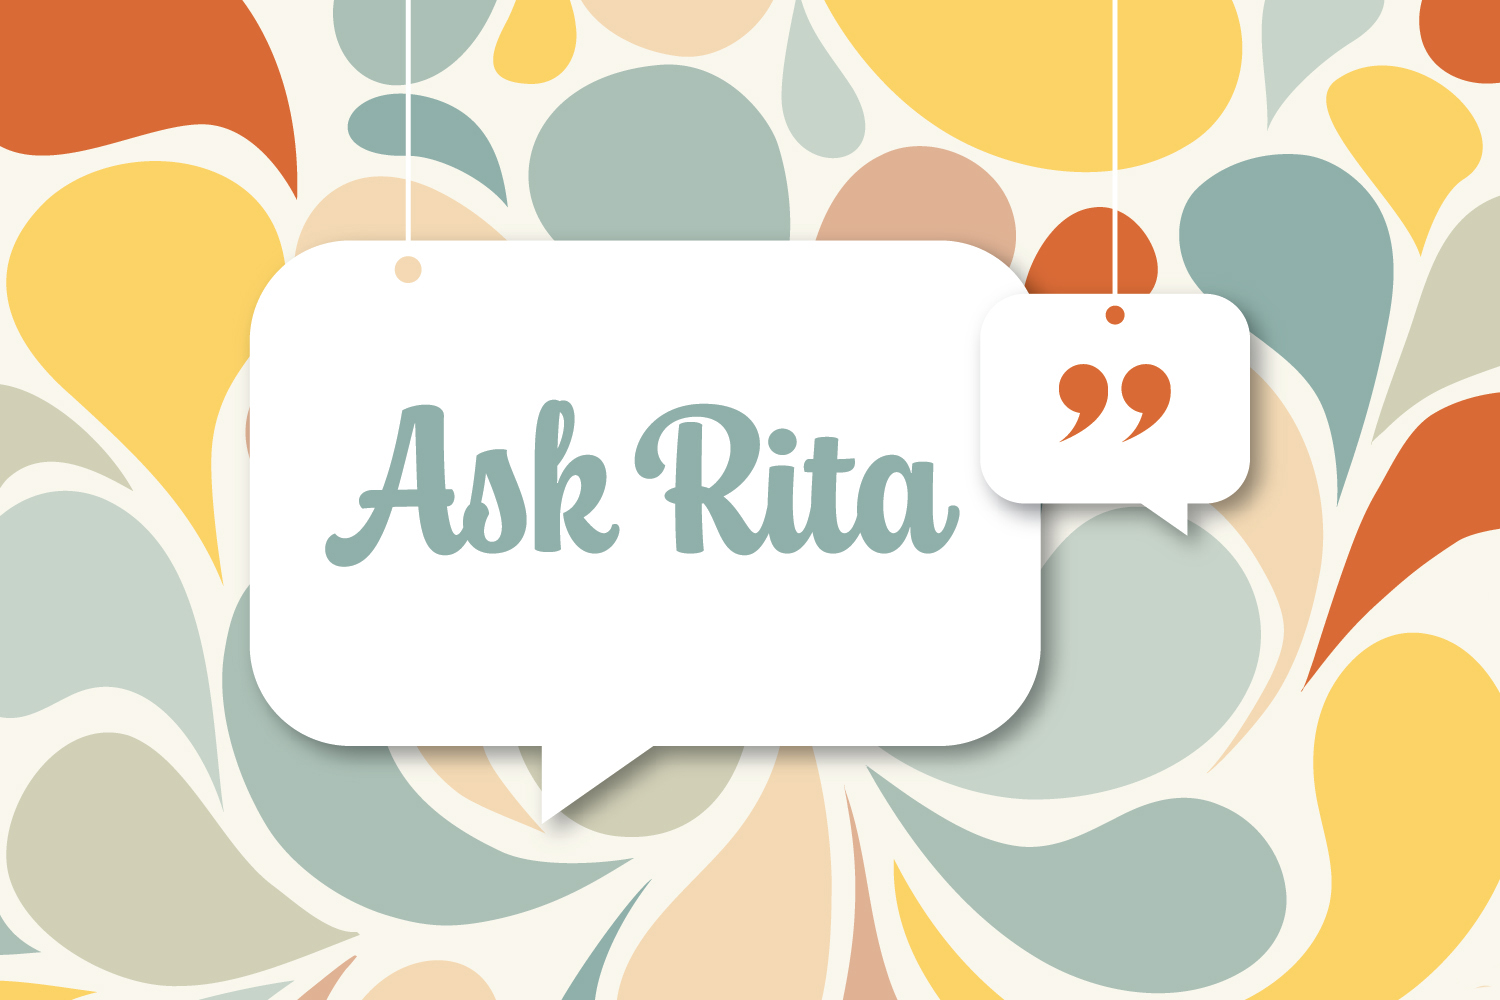 Ask Rita in HR: How Do I Stay ADA Compliant When an Employee Has a Disability?